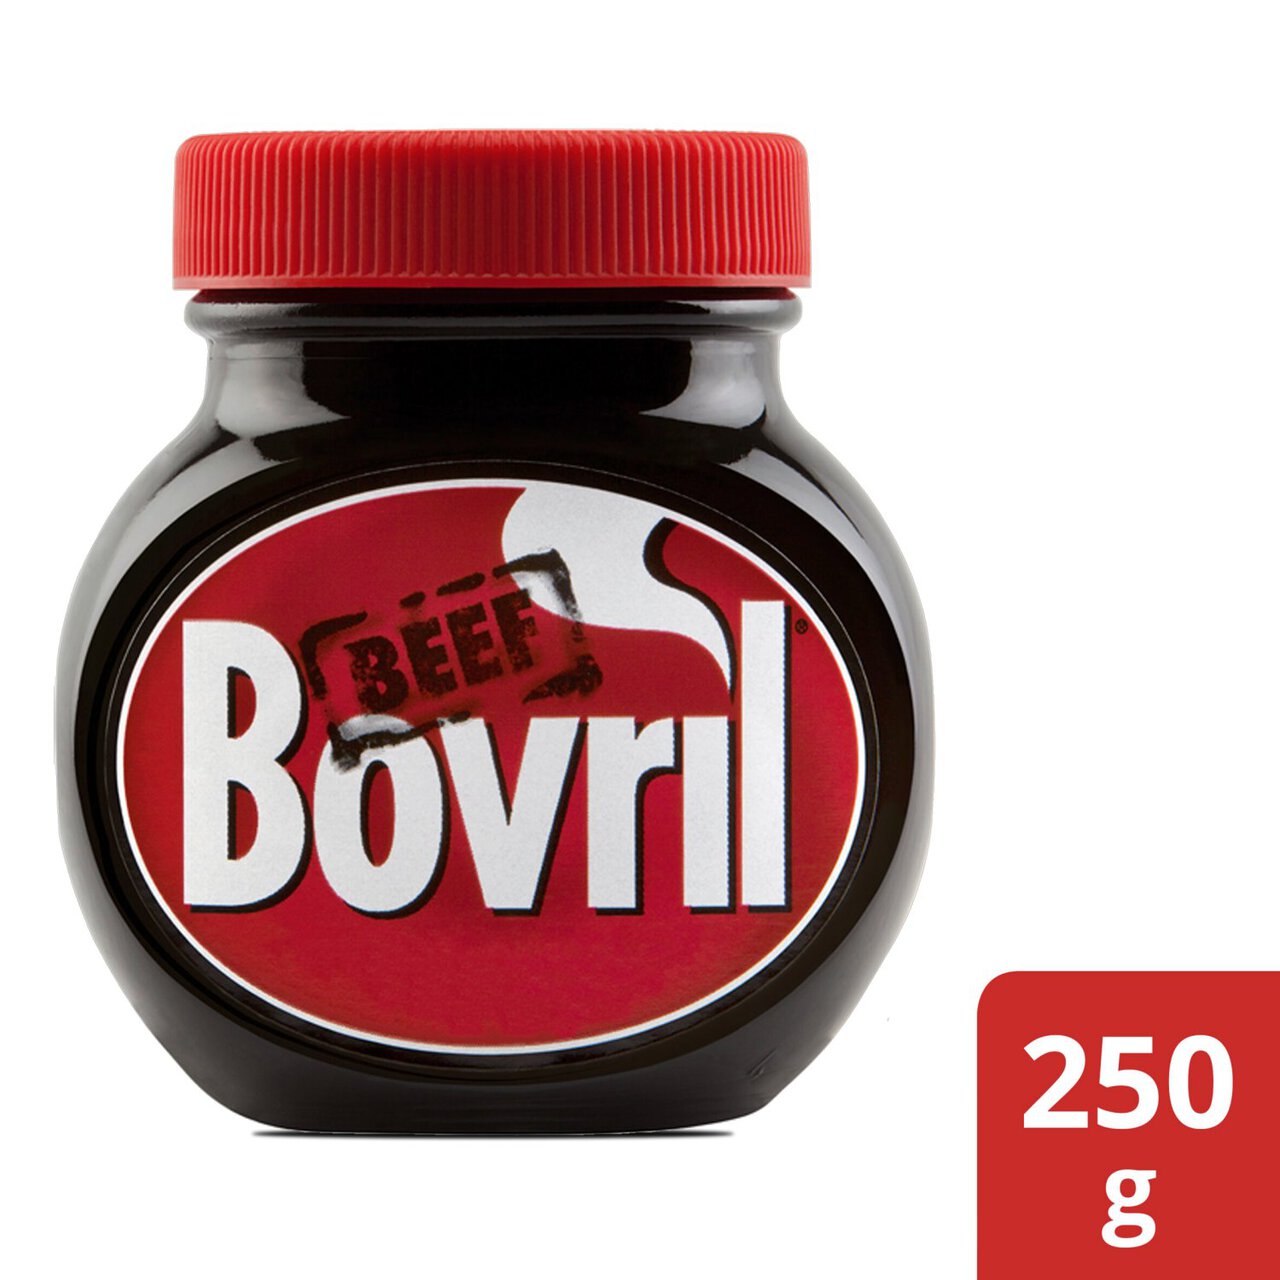 Bovril Beef Yeast Extract Spread 250g